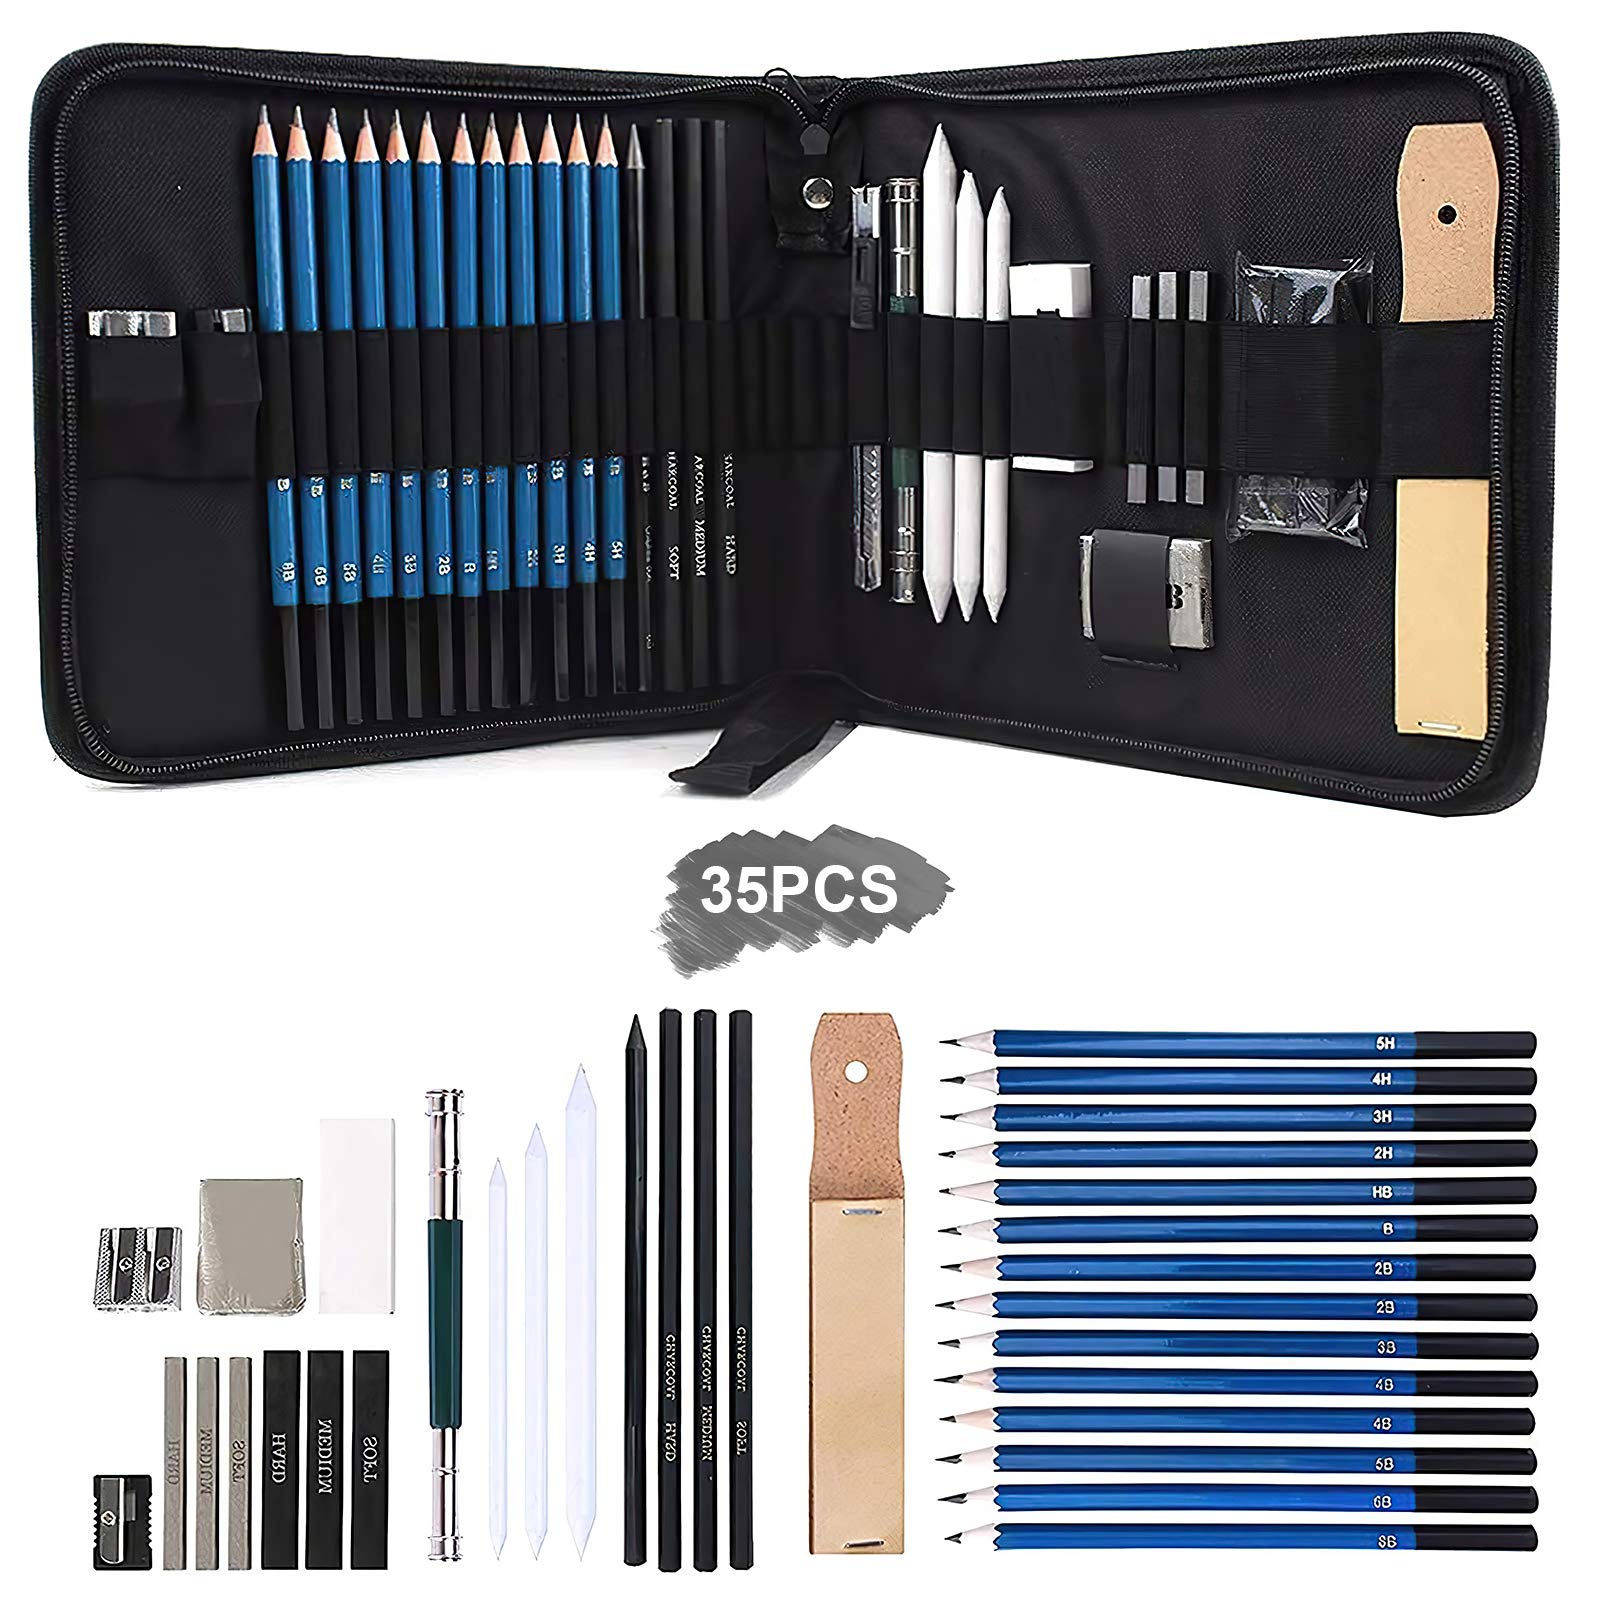 74-Piece Drawing Set - Beginner or Professional Tool Set Pencil Case with Watercolor Pencils Colored Graphite and Charcoal Pencils + Accessories